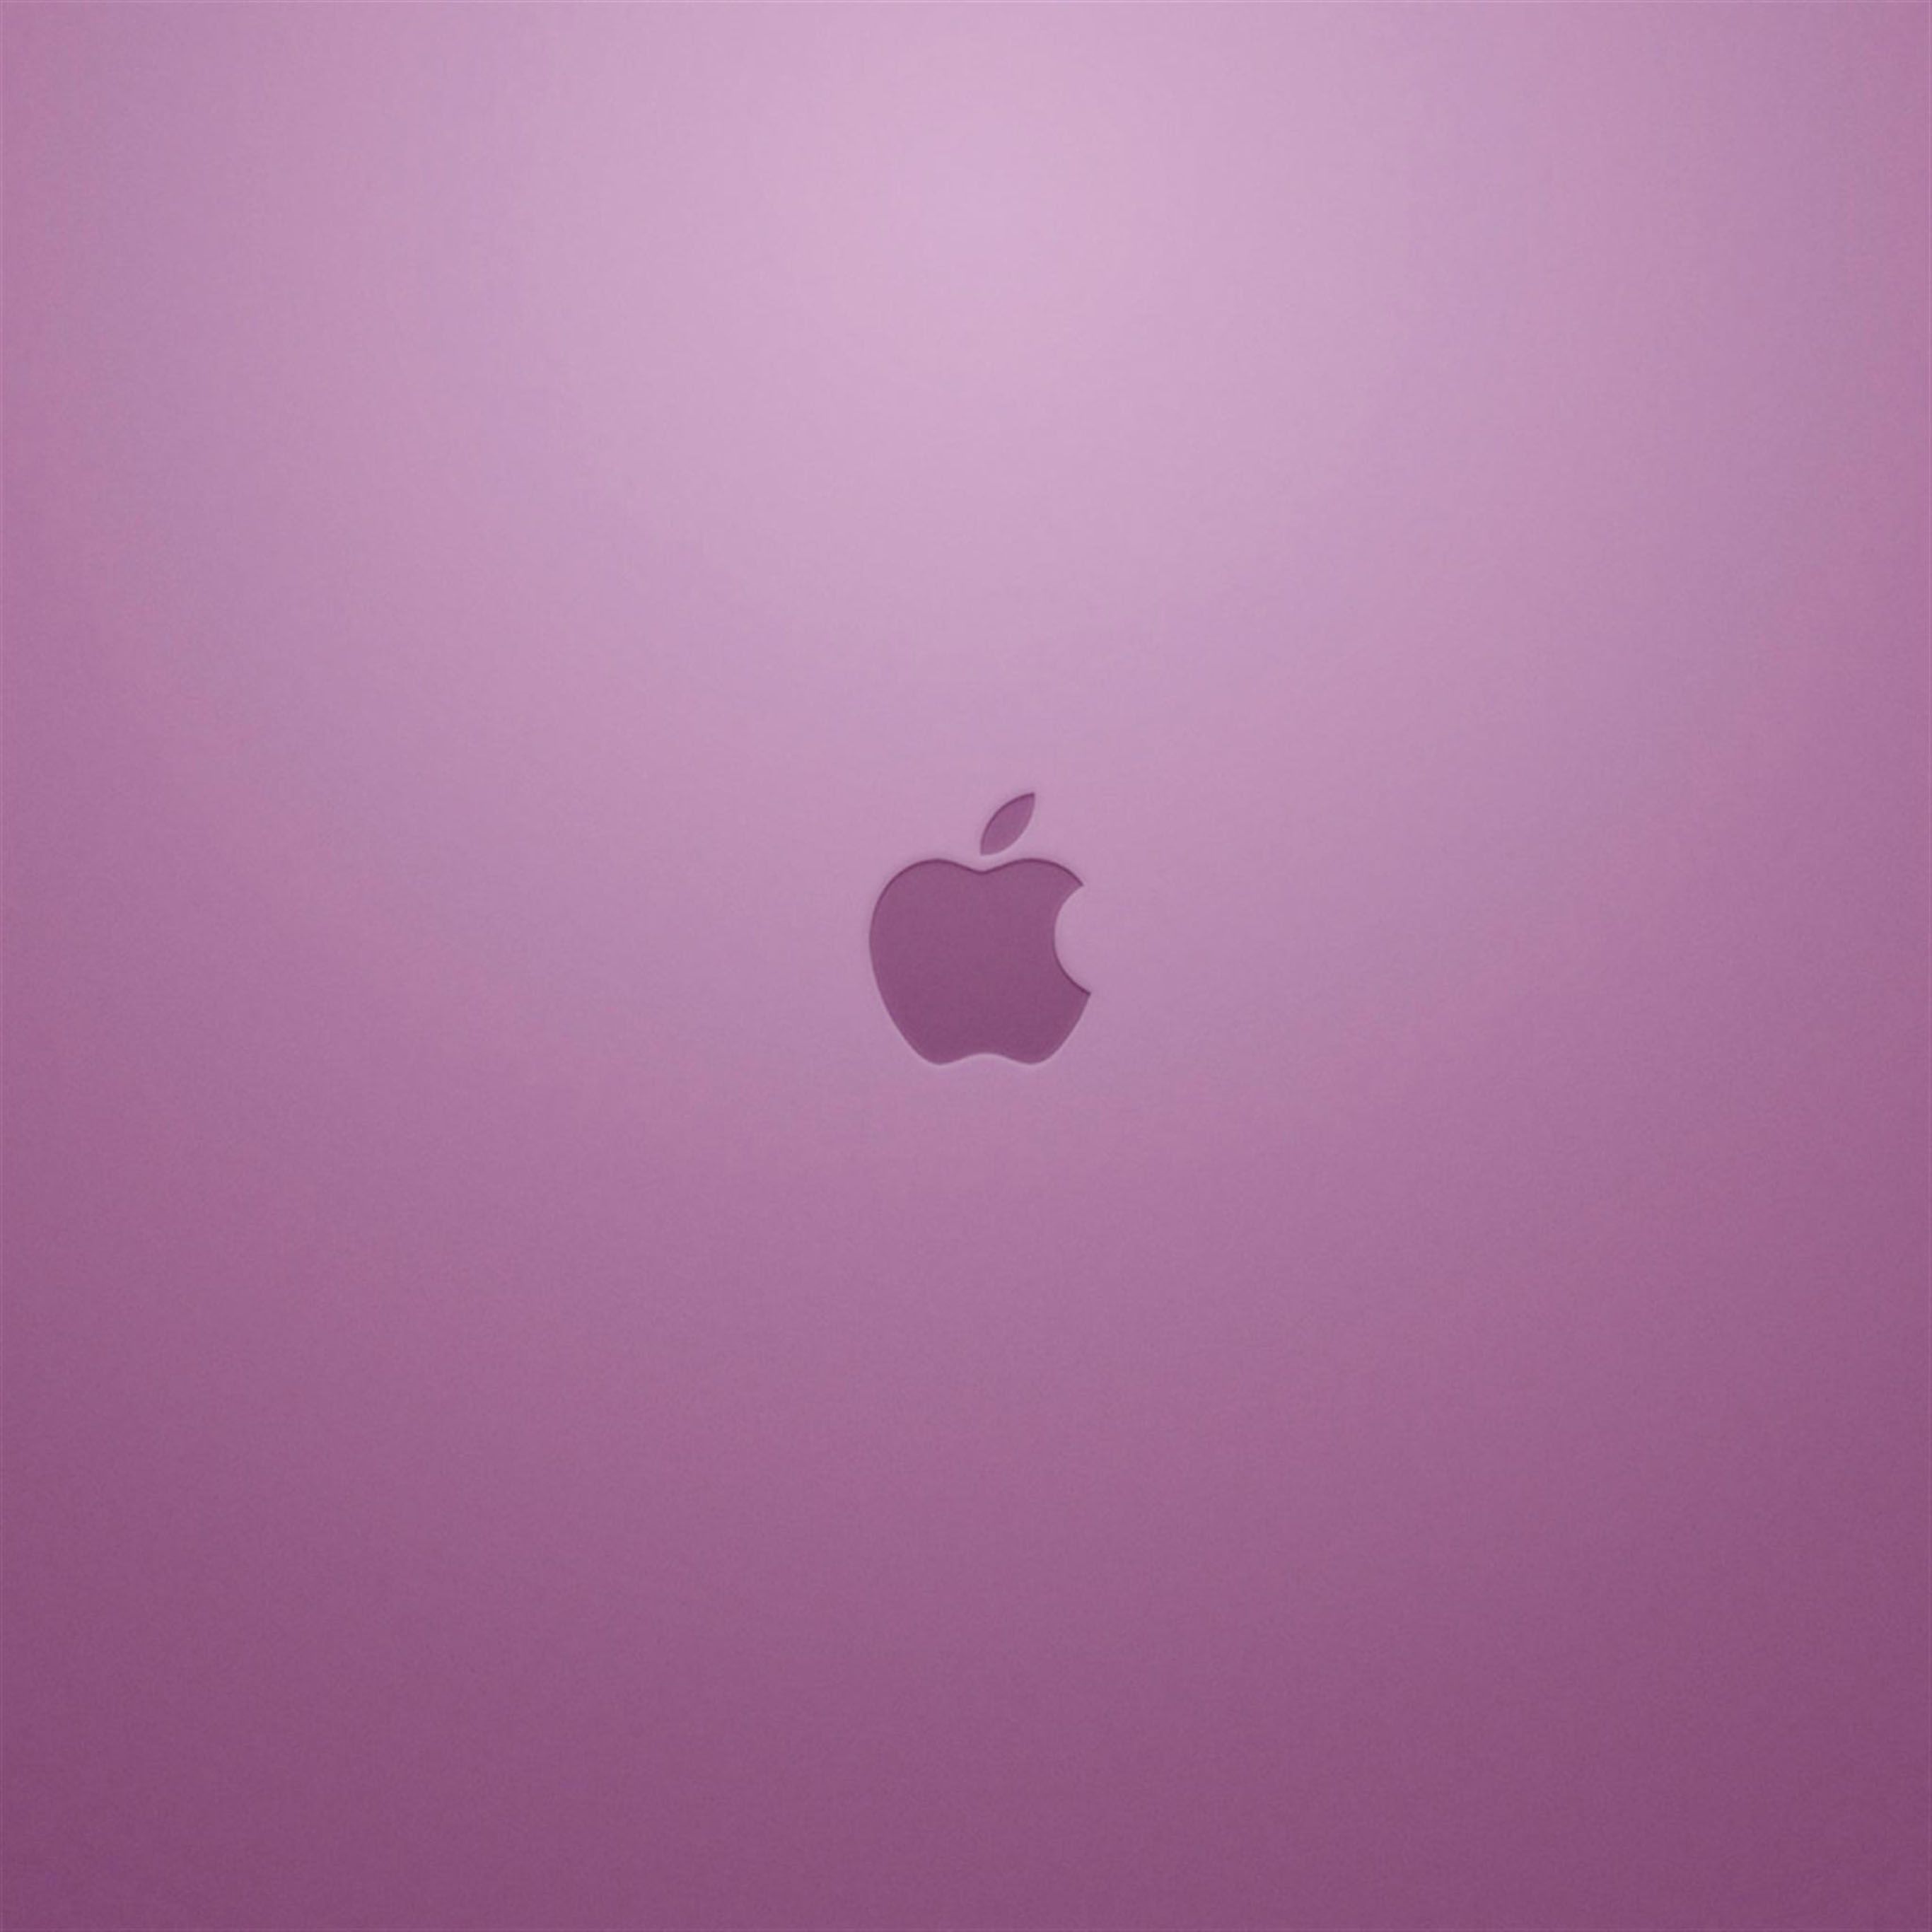 Apple wallpaper Images  Search Images on Everypixel